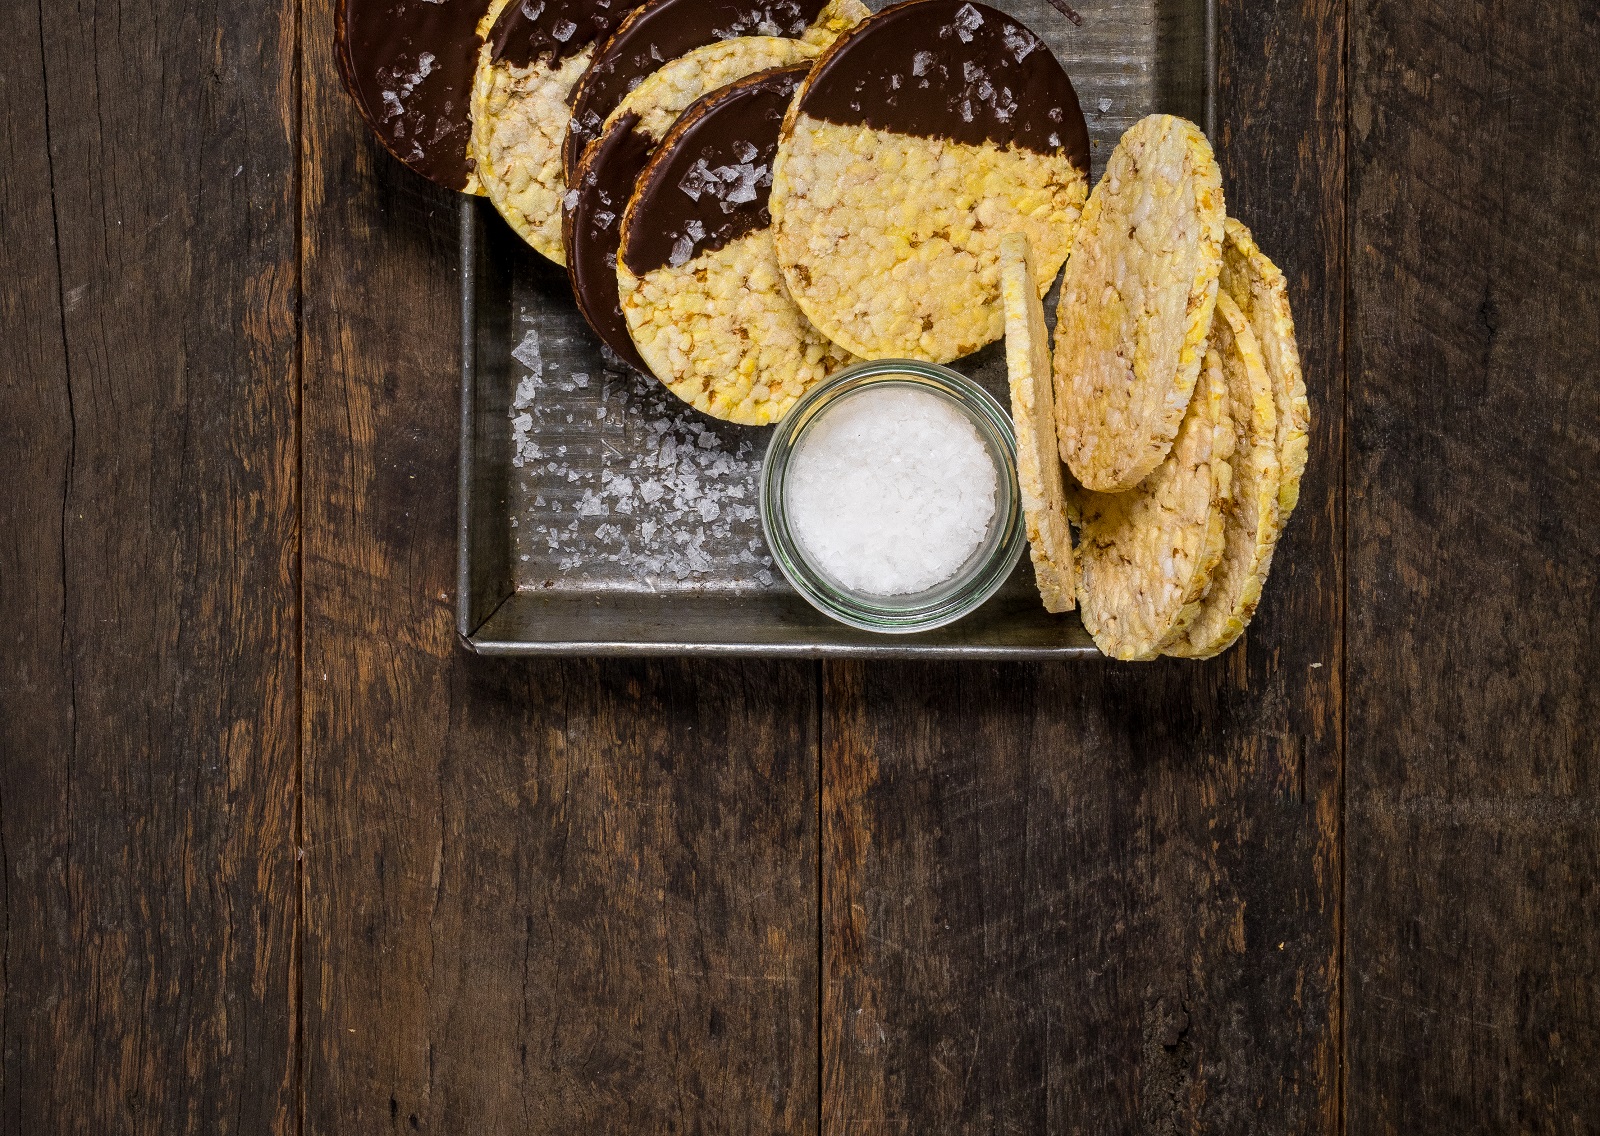 CORN THINS slices dipped in dark choclate with a sprinkle of sea salt